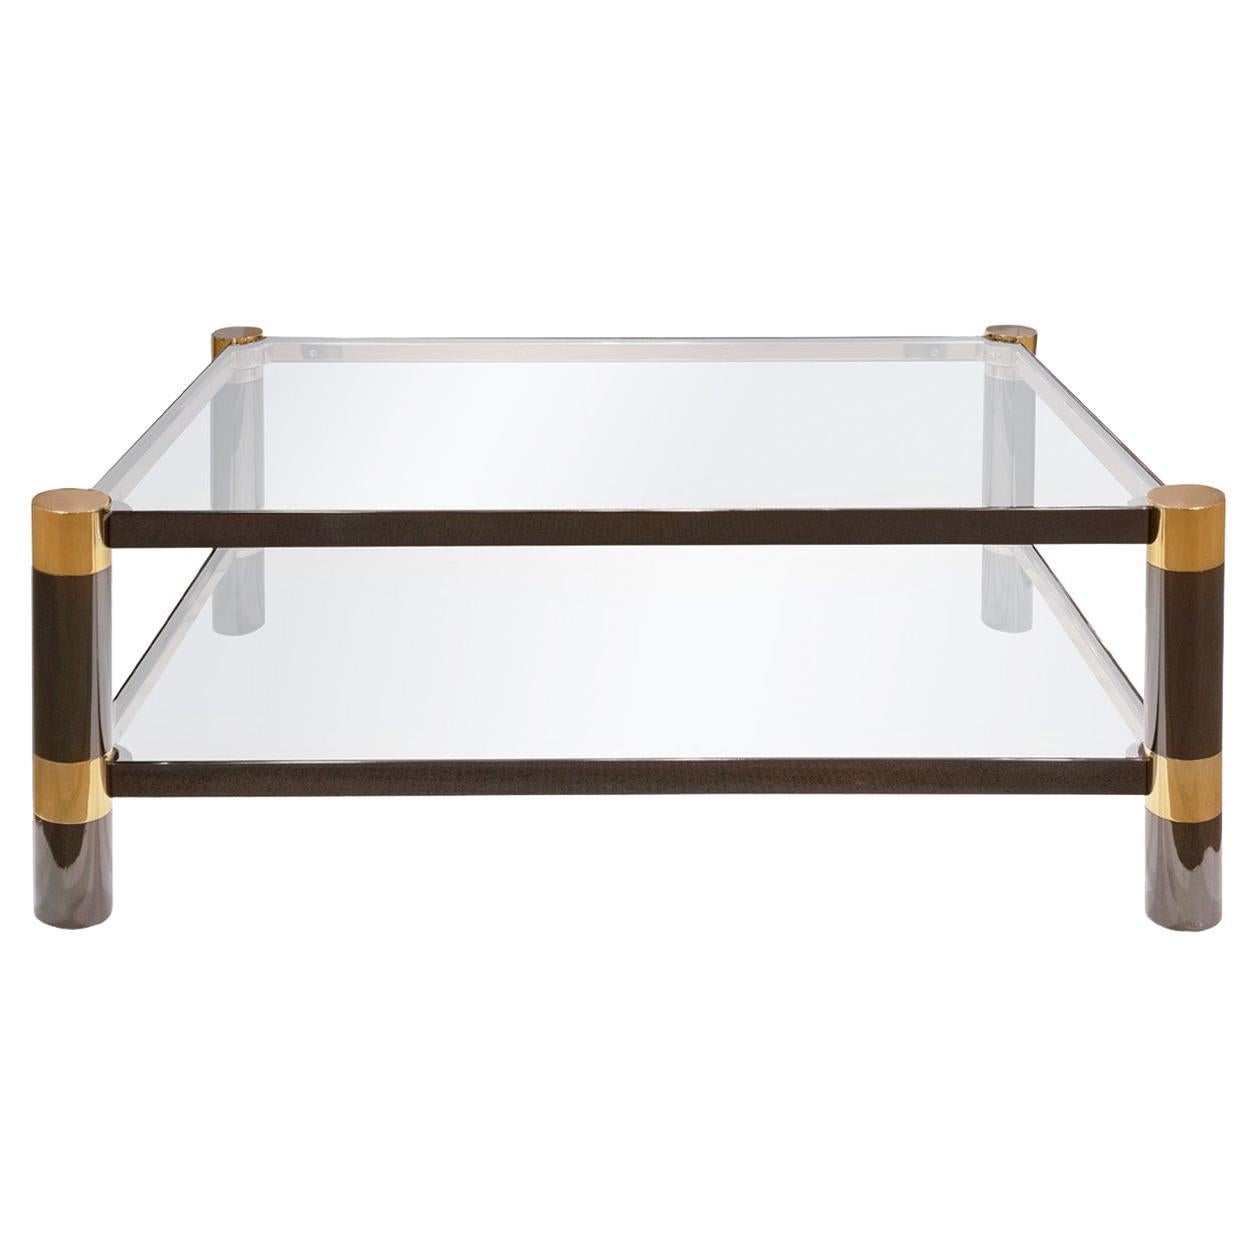 Karl Springer Iconic "Round Leg Coffee Table" in Gunmetal and Brass, 1980s